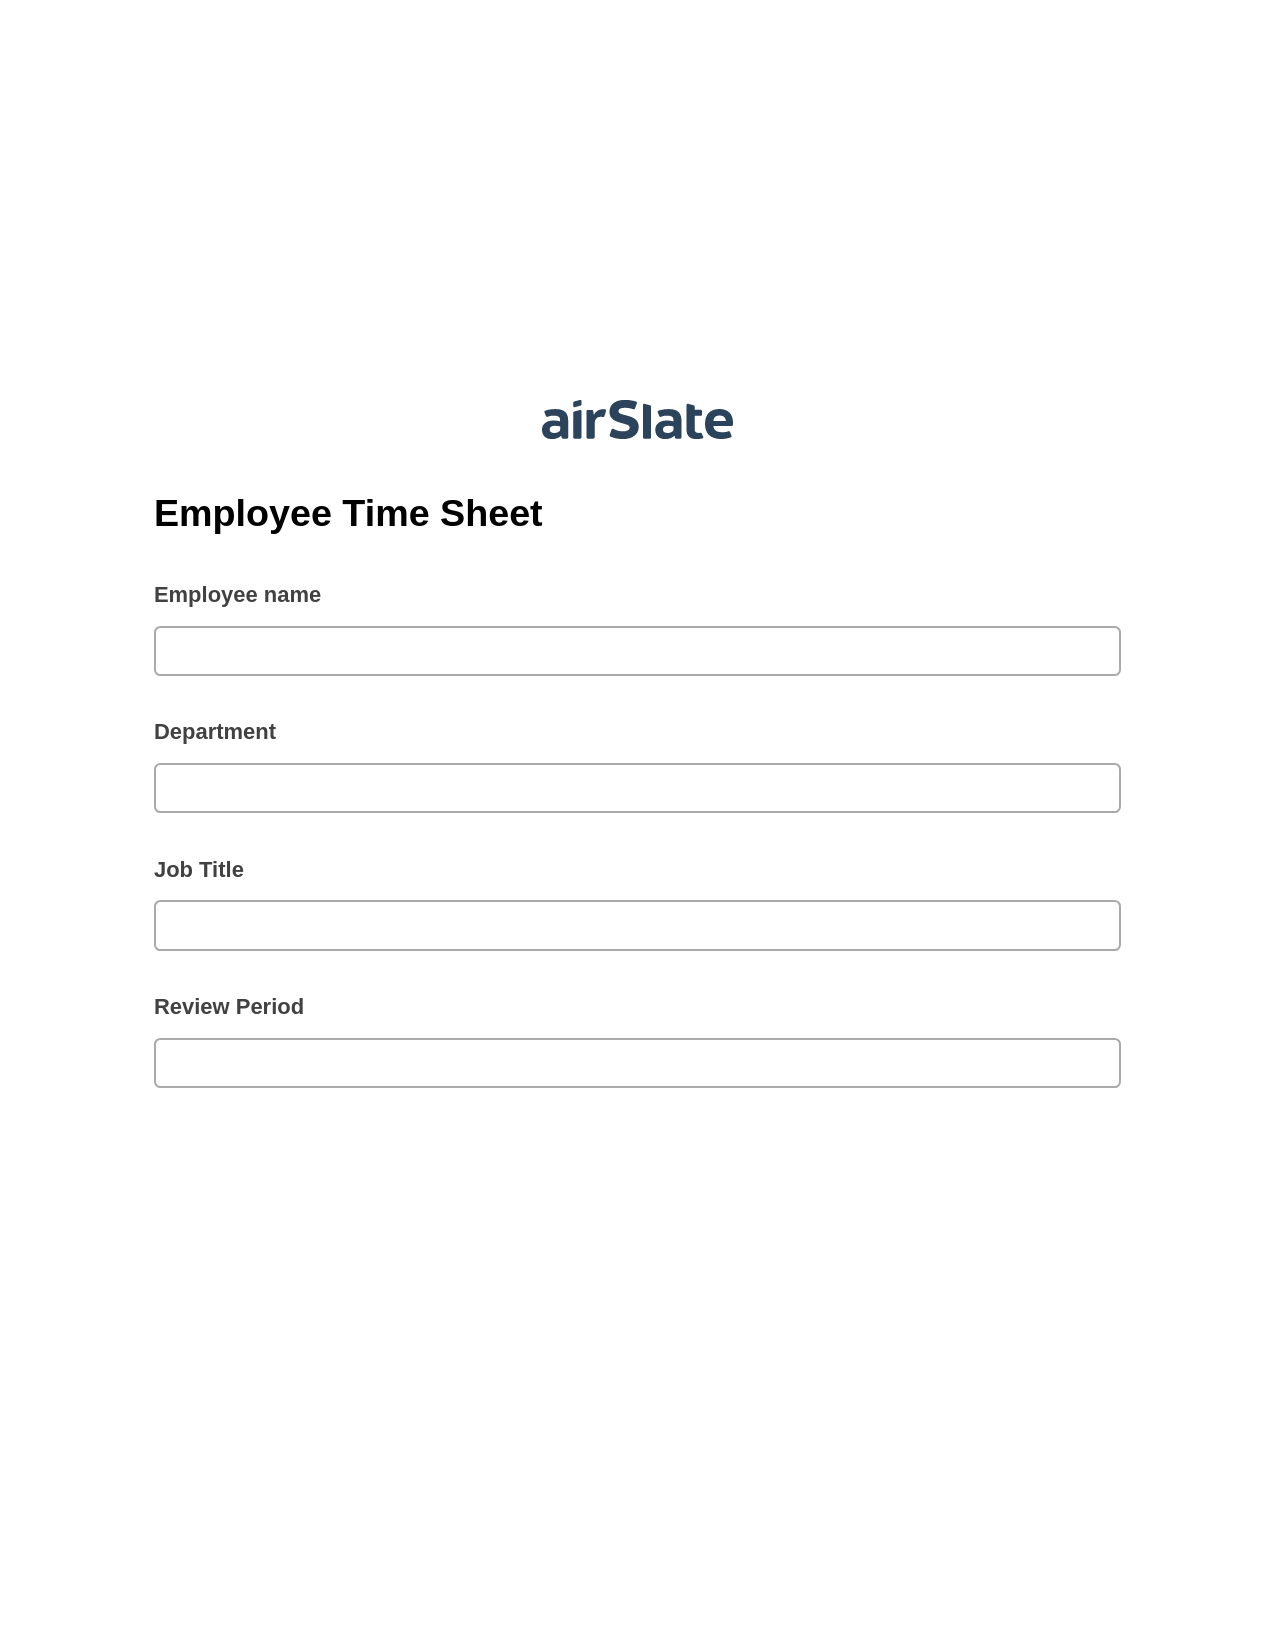 Multirole Employee Time Sheet Pre-fill Dropdowns from CSV file Bot, Create Salesforce Records Bot, Export to WebMerge Bot